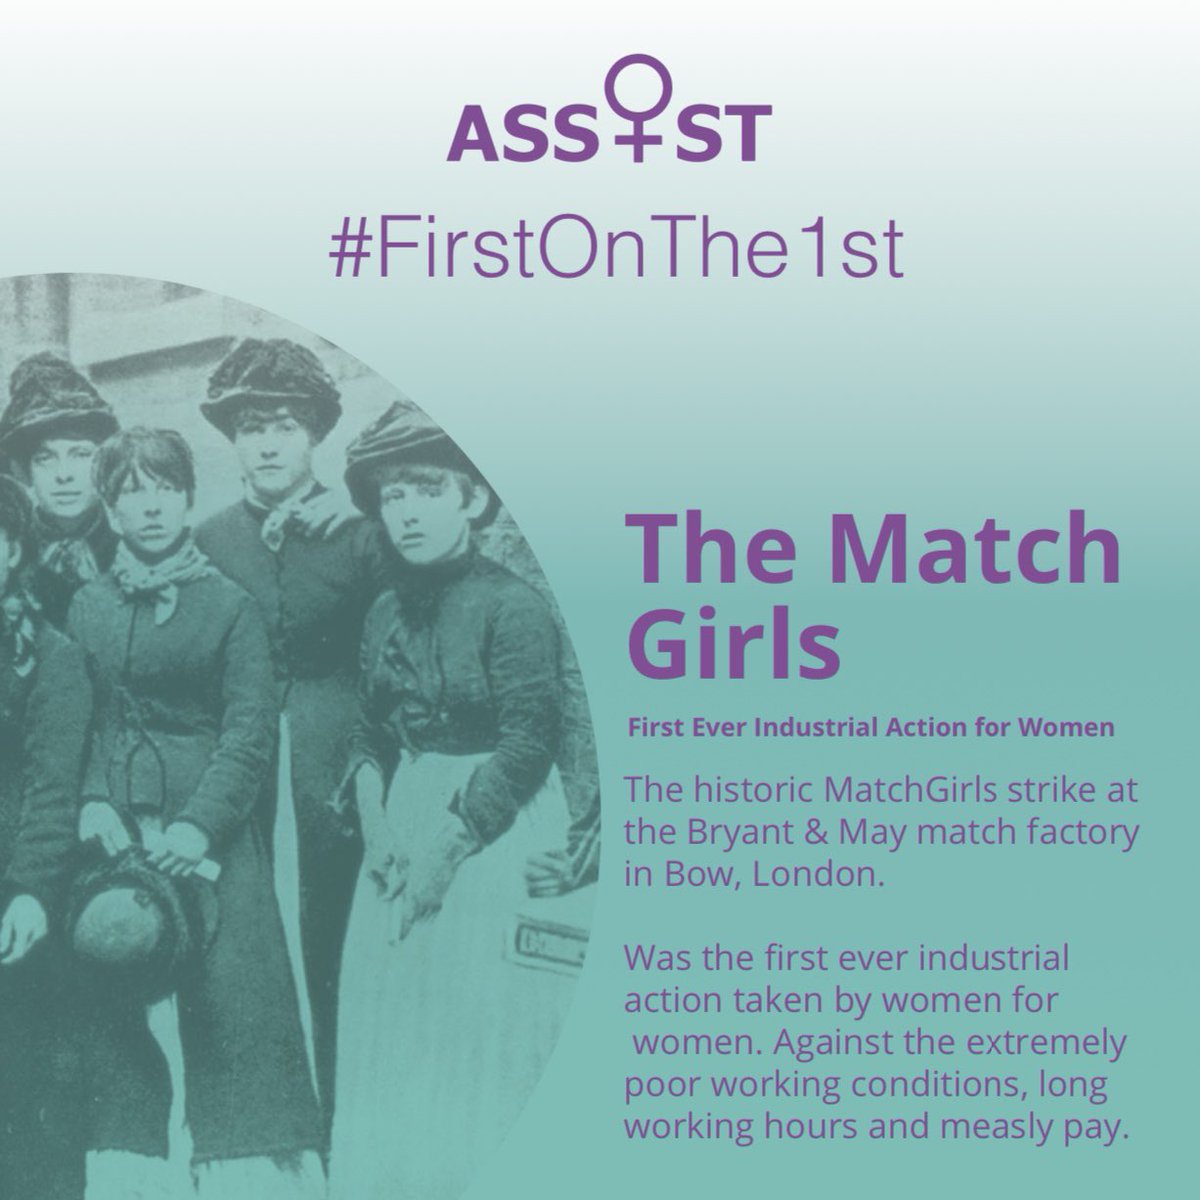 ⭐️ #firstonthe1st ⭐️

It’s November! 

This month we are honouring the Match Girls, who organised the first ever industrial action taken by women for women. 💪💜